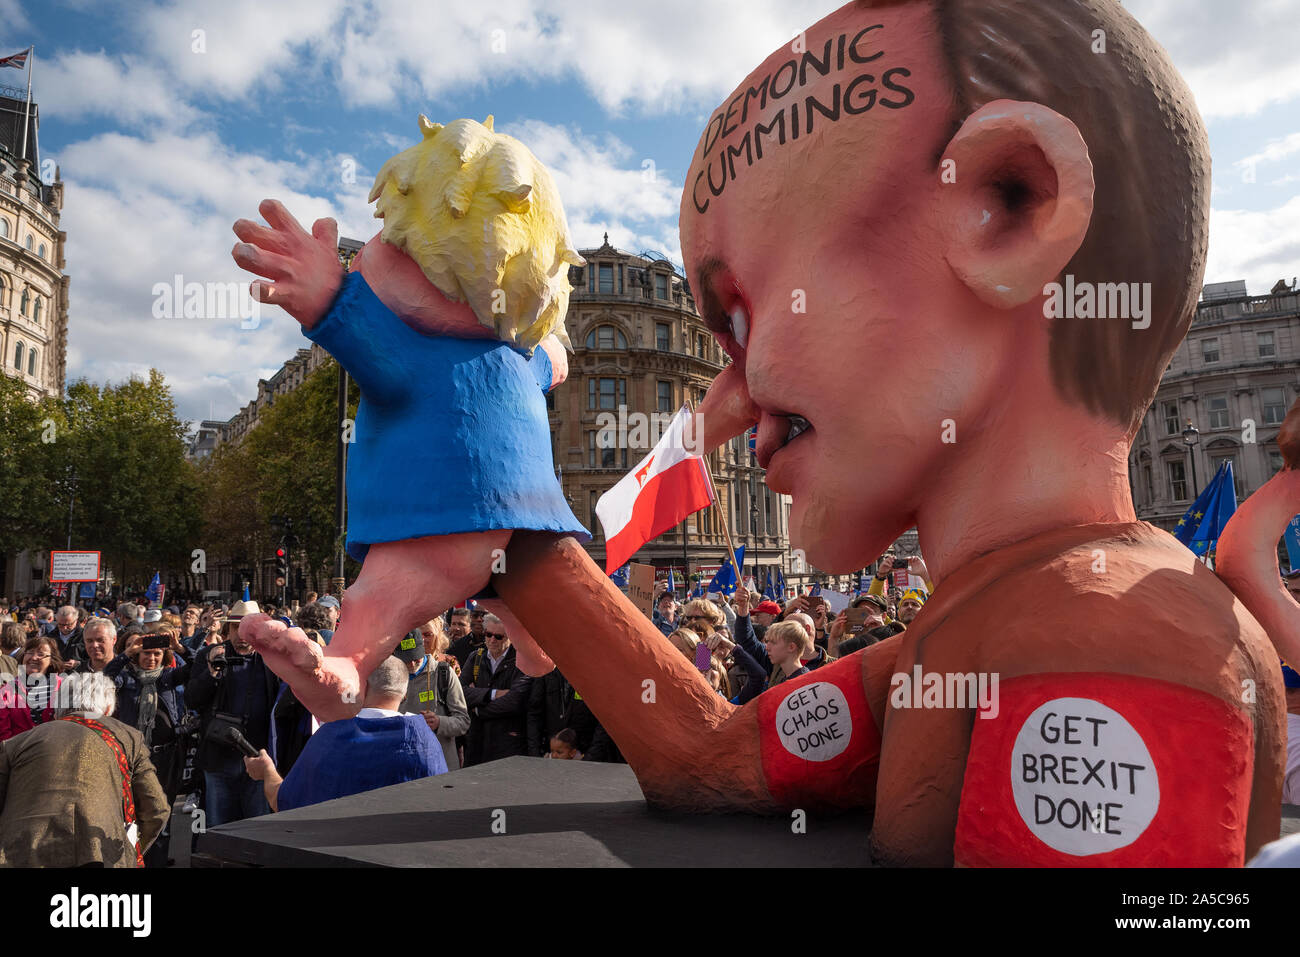 London, UK, 19 Oct 2019. Peoples Vote March. While Parliament debated the deal negotiated by PM Boris Johnson with the EU hundreds of thousands of anti Brexit protestors marched from Park Lane to Parliament Square. Pictured, Boris Johnson and Dominic Cummings effigies on small float parked in Trafalgar Square. Boris Johnson depicted as Dominic Cummings puppet. The Dominic Cummings effigie has Demonic Cummings written on its head, horns and a tail. Credit: Stephen Bell/Alamy Stock Photo